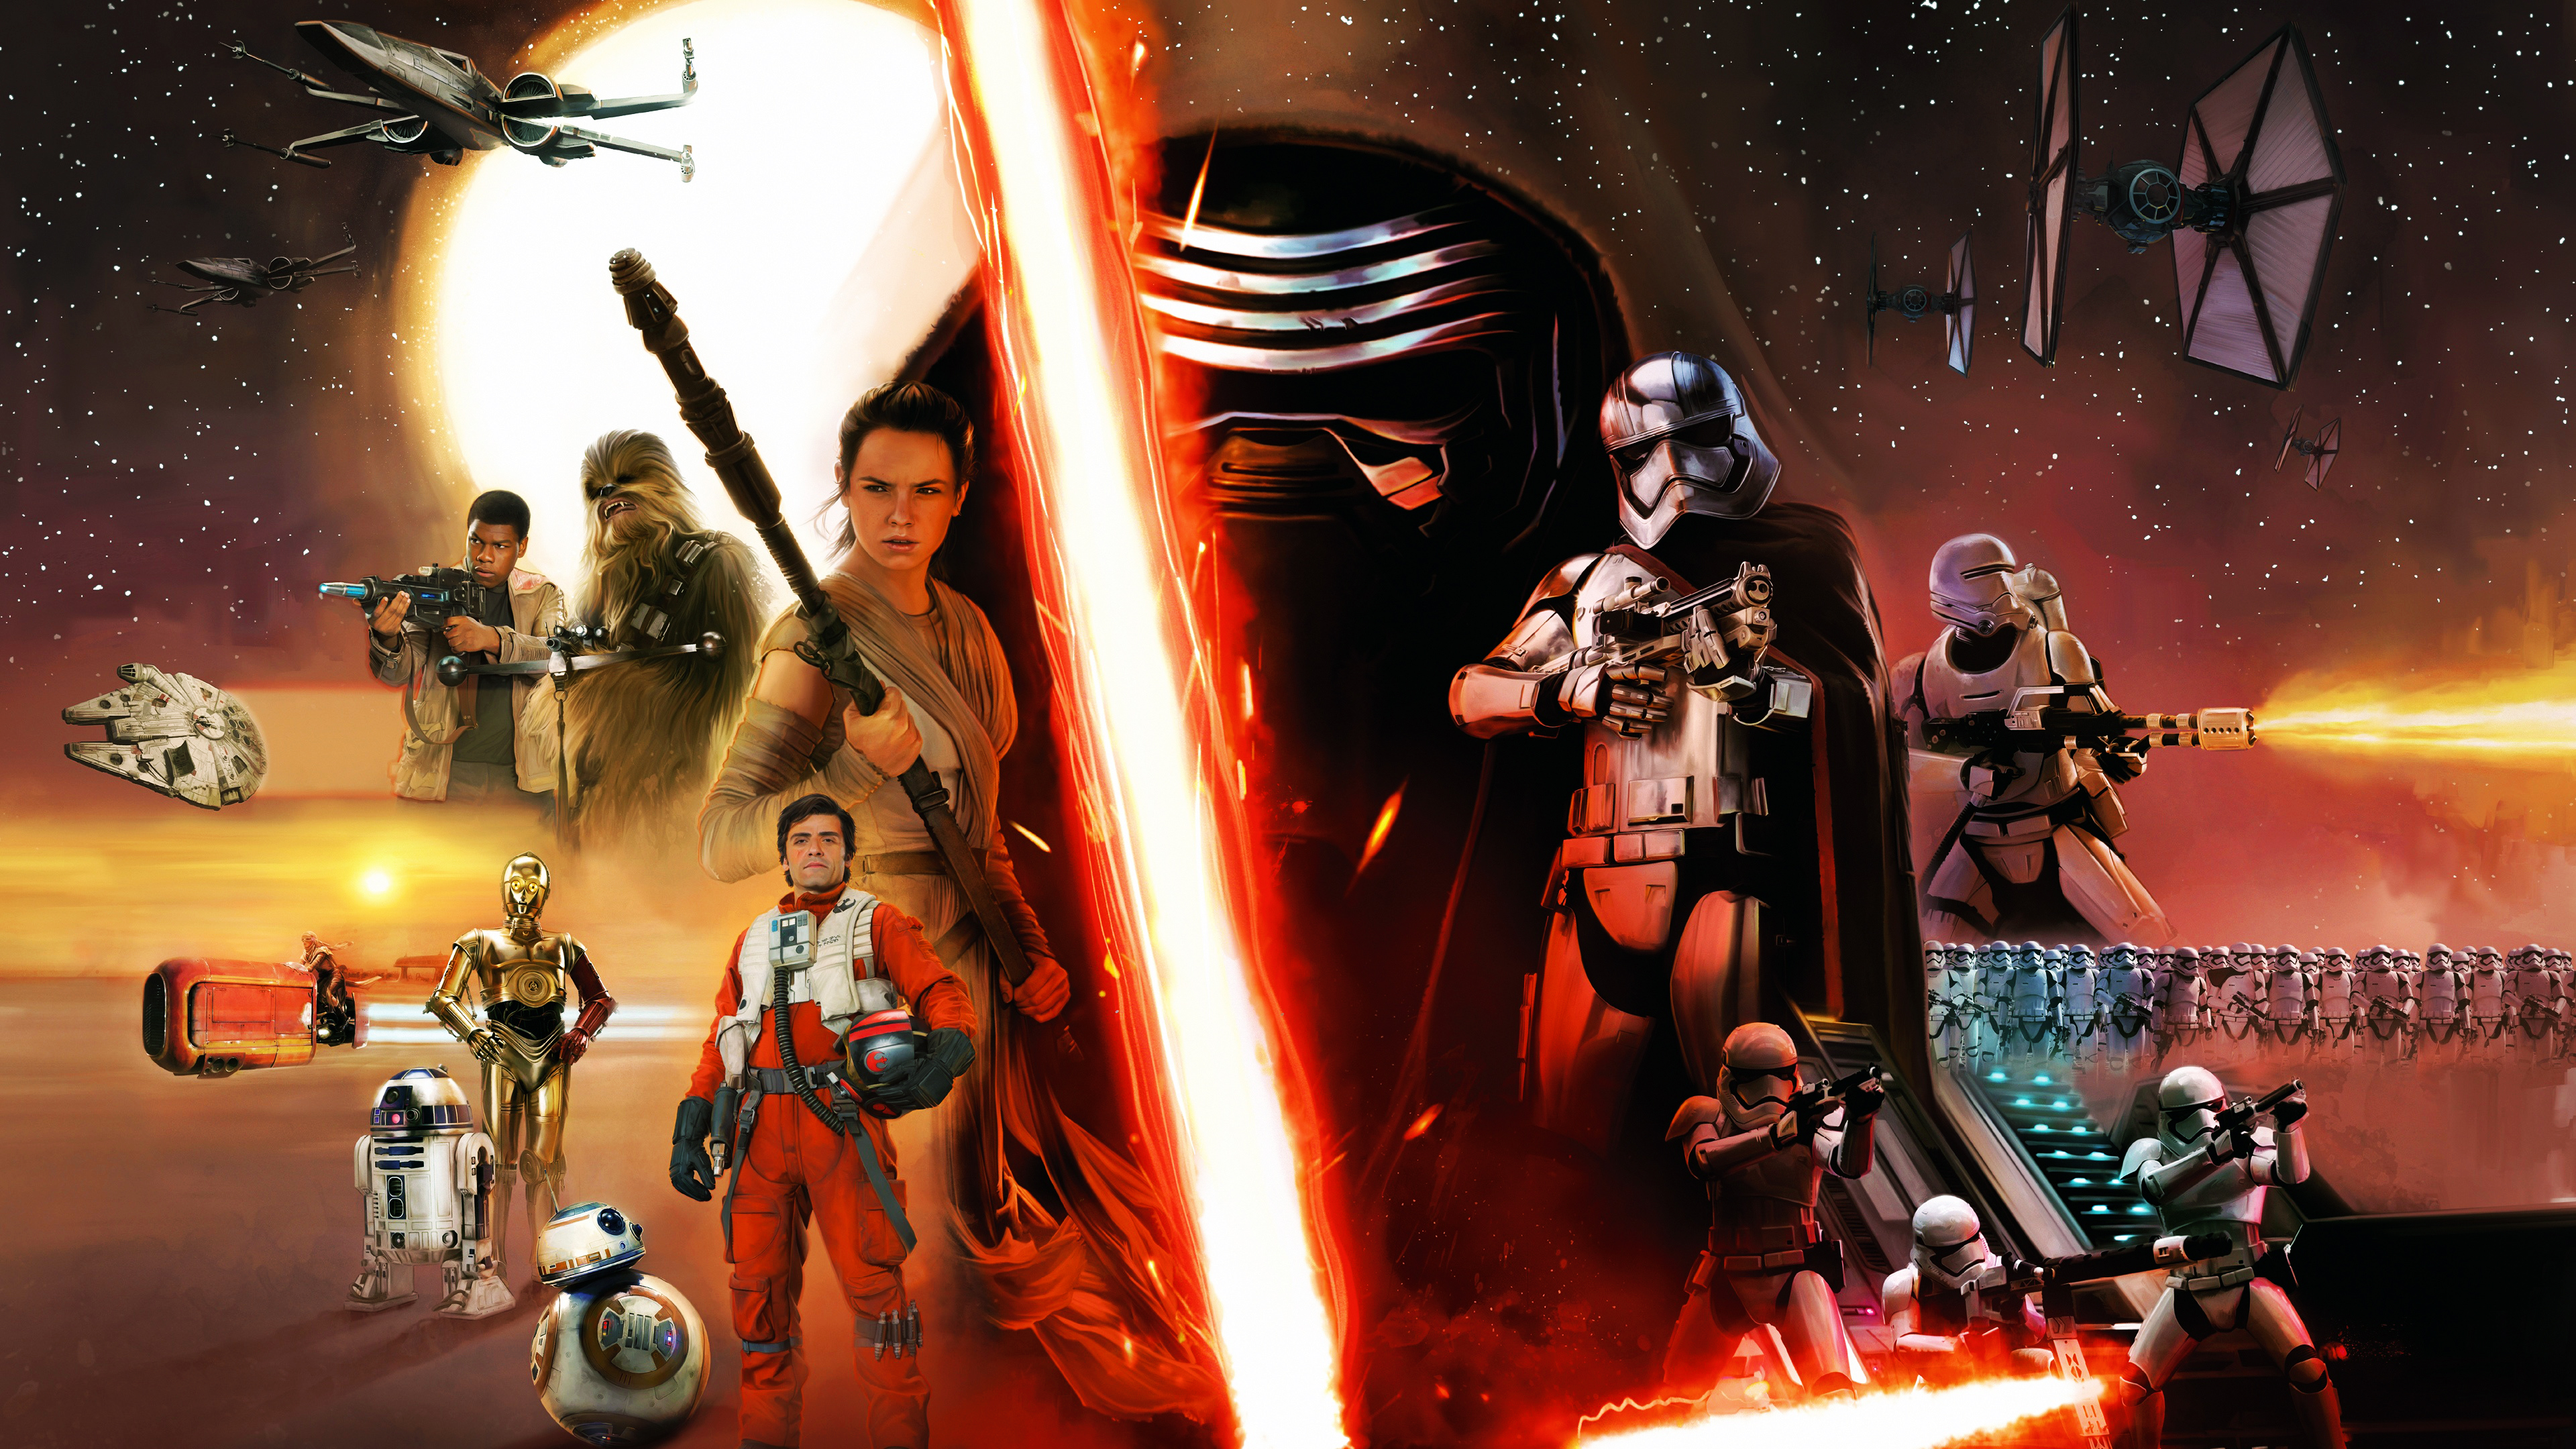 Star Wars Episode VII: The Force Awakens Pics, Movie Collection